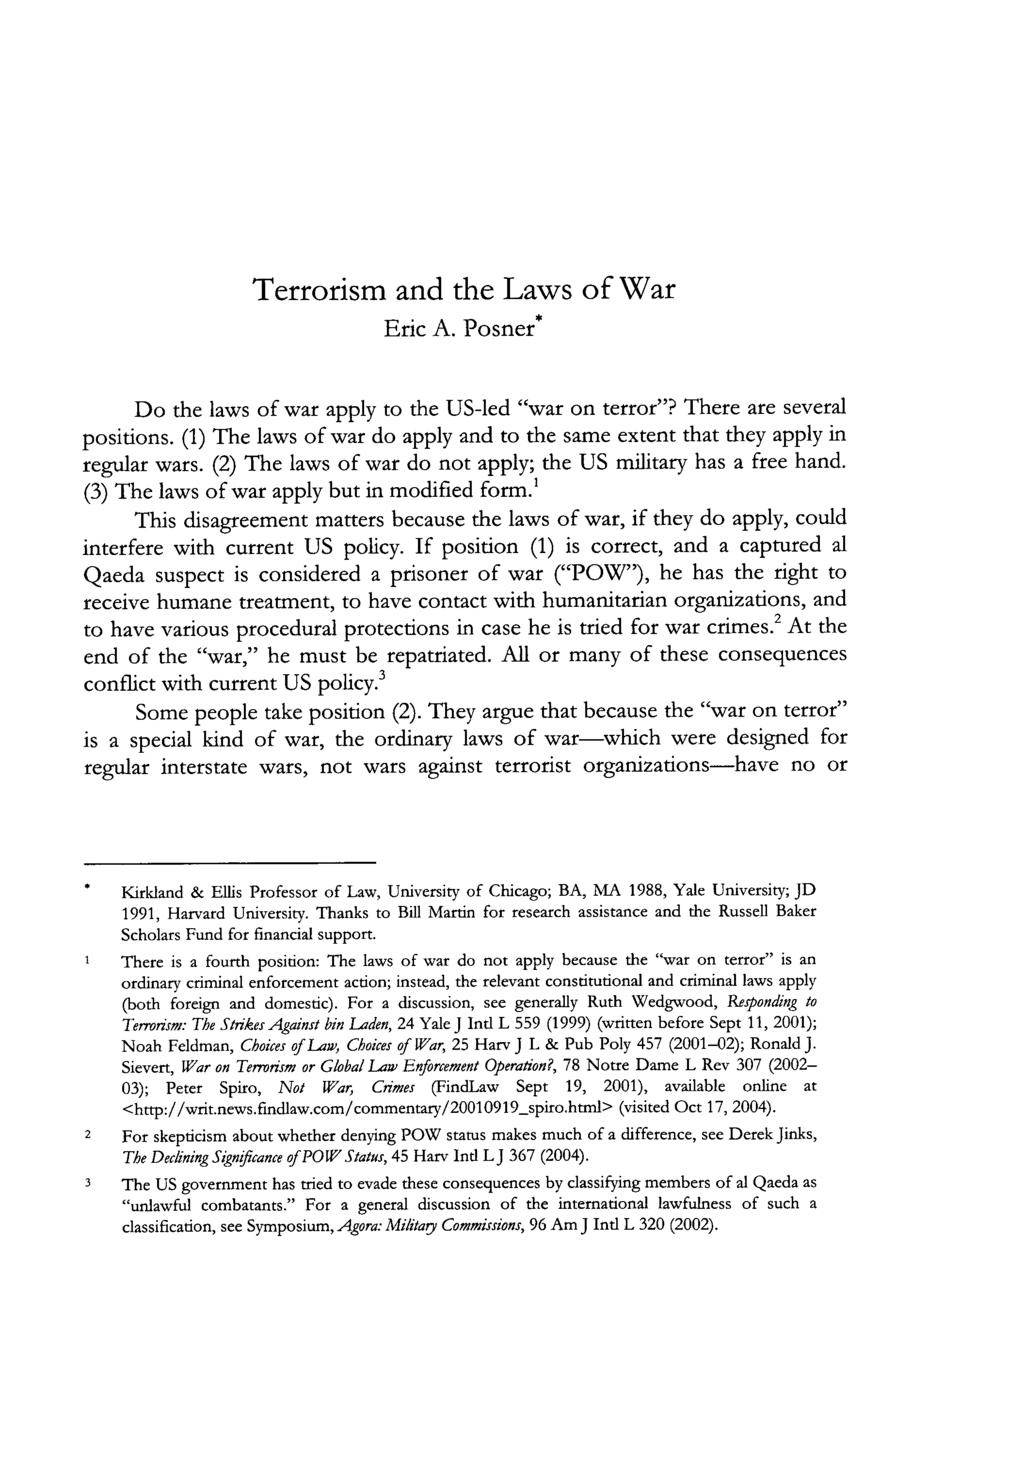 Eric A. Posner* Do the laws of war apply to the US-led "war on terror"? There are several positions. (1) The laws of war do apply and to the same extent that they apply in regular wars.